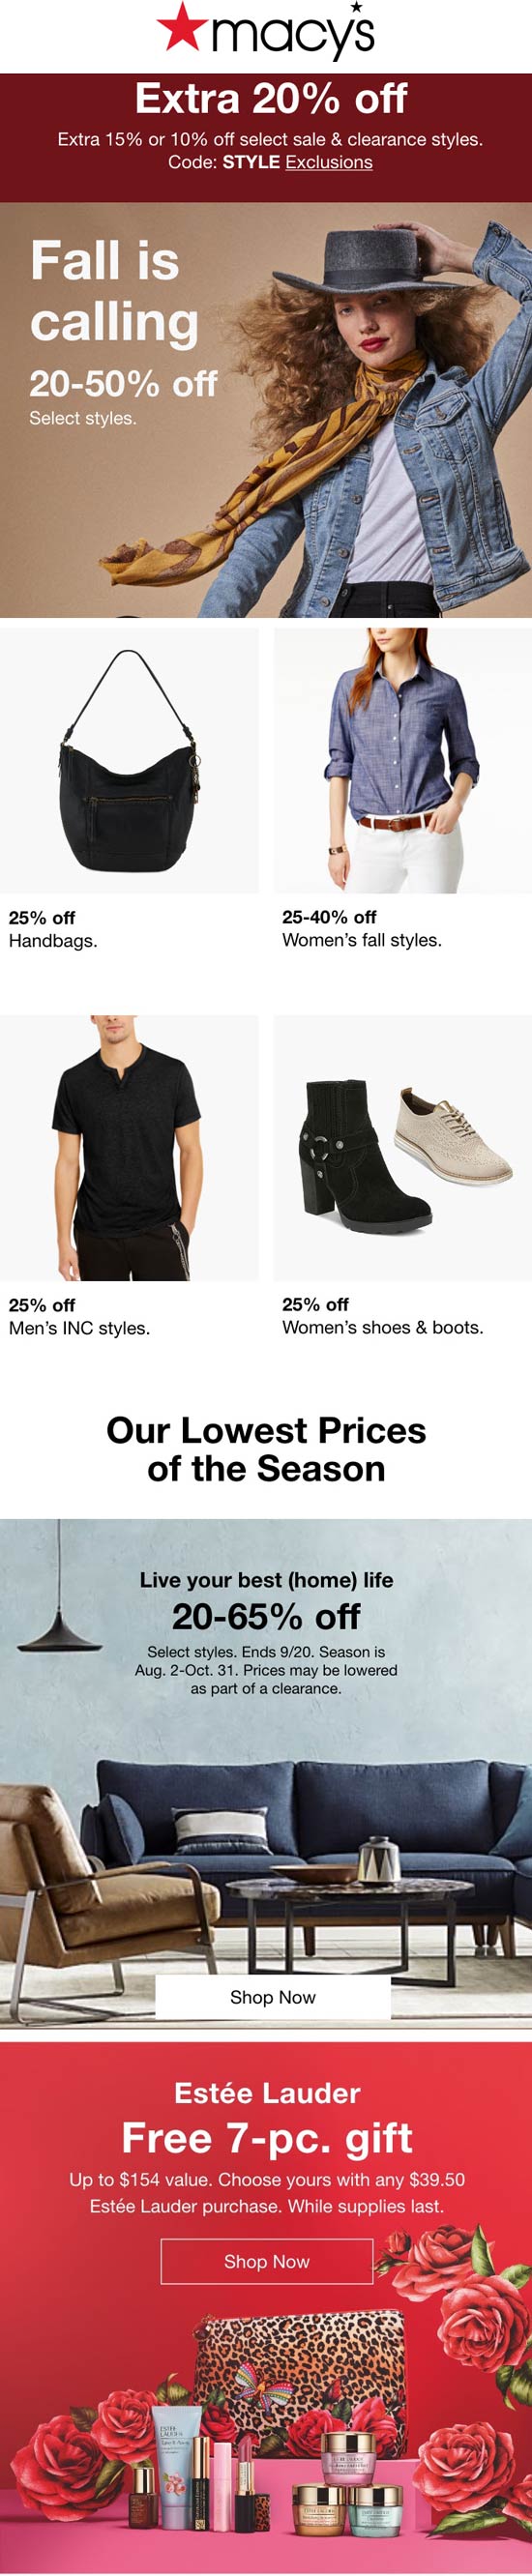 Macys stores Coupon  Extra 20% off at Macys, or online via promo code STYLE #macys 